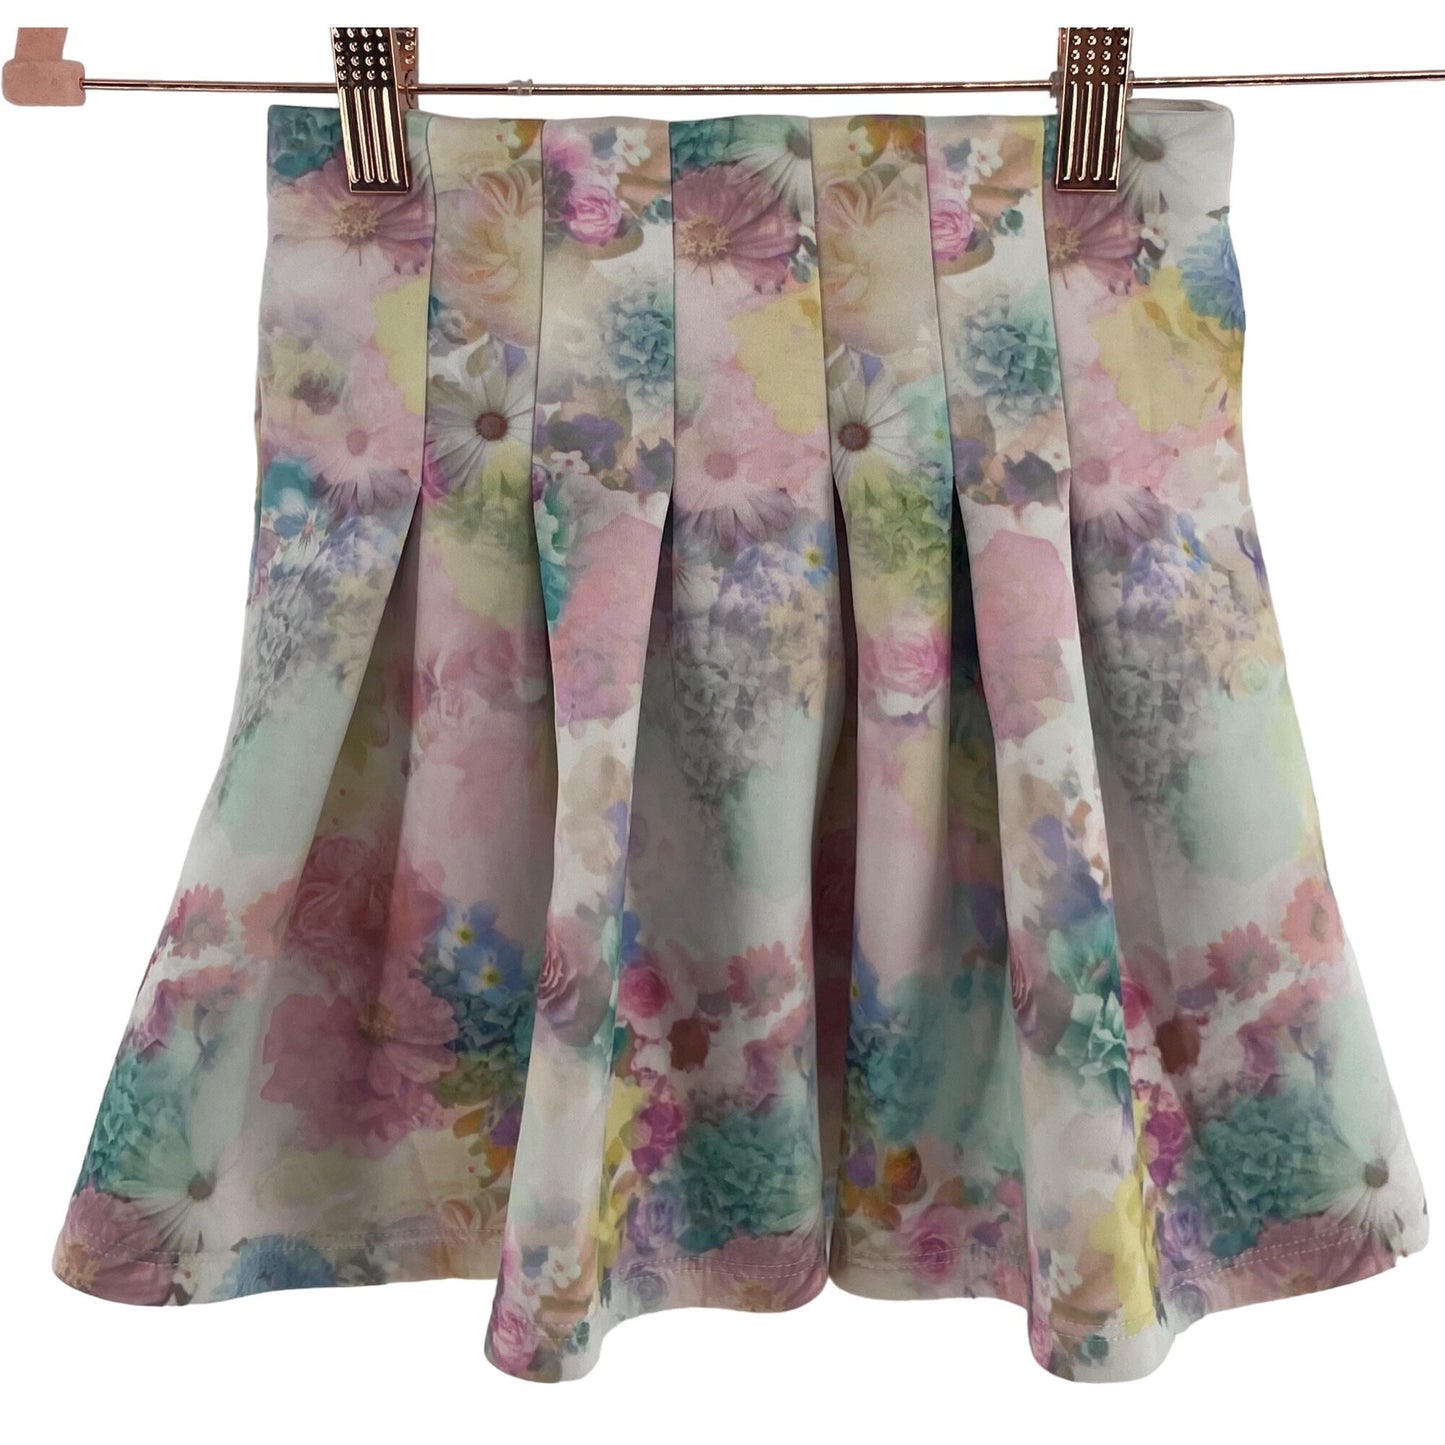 H&M Girl's Size 6-8 Pastel Multi-Colored Floral A-Line Pleated Mini Skirt